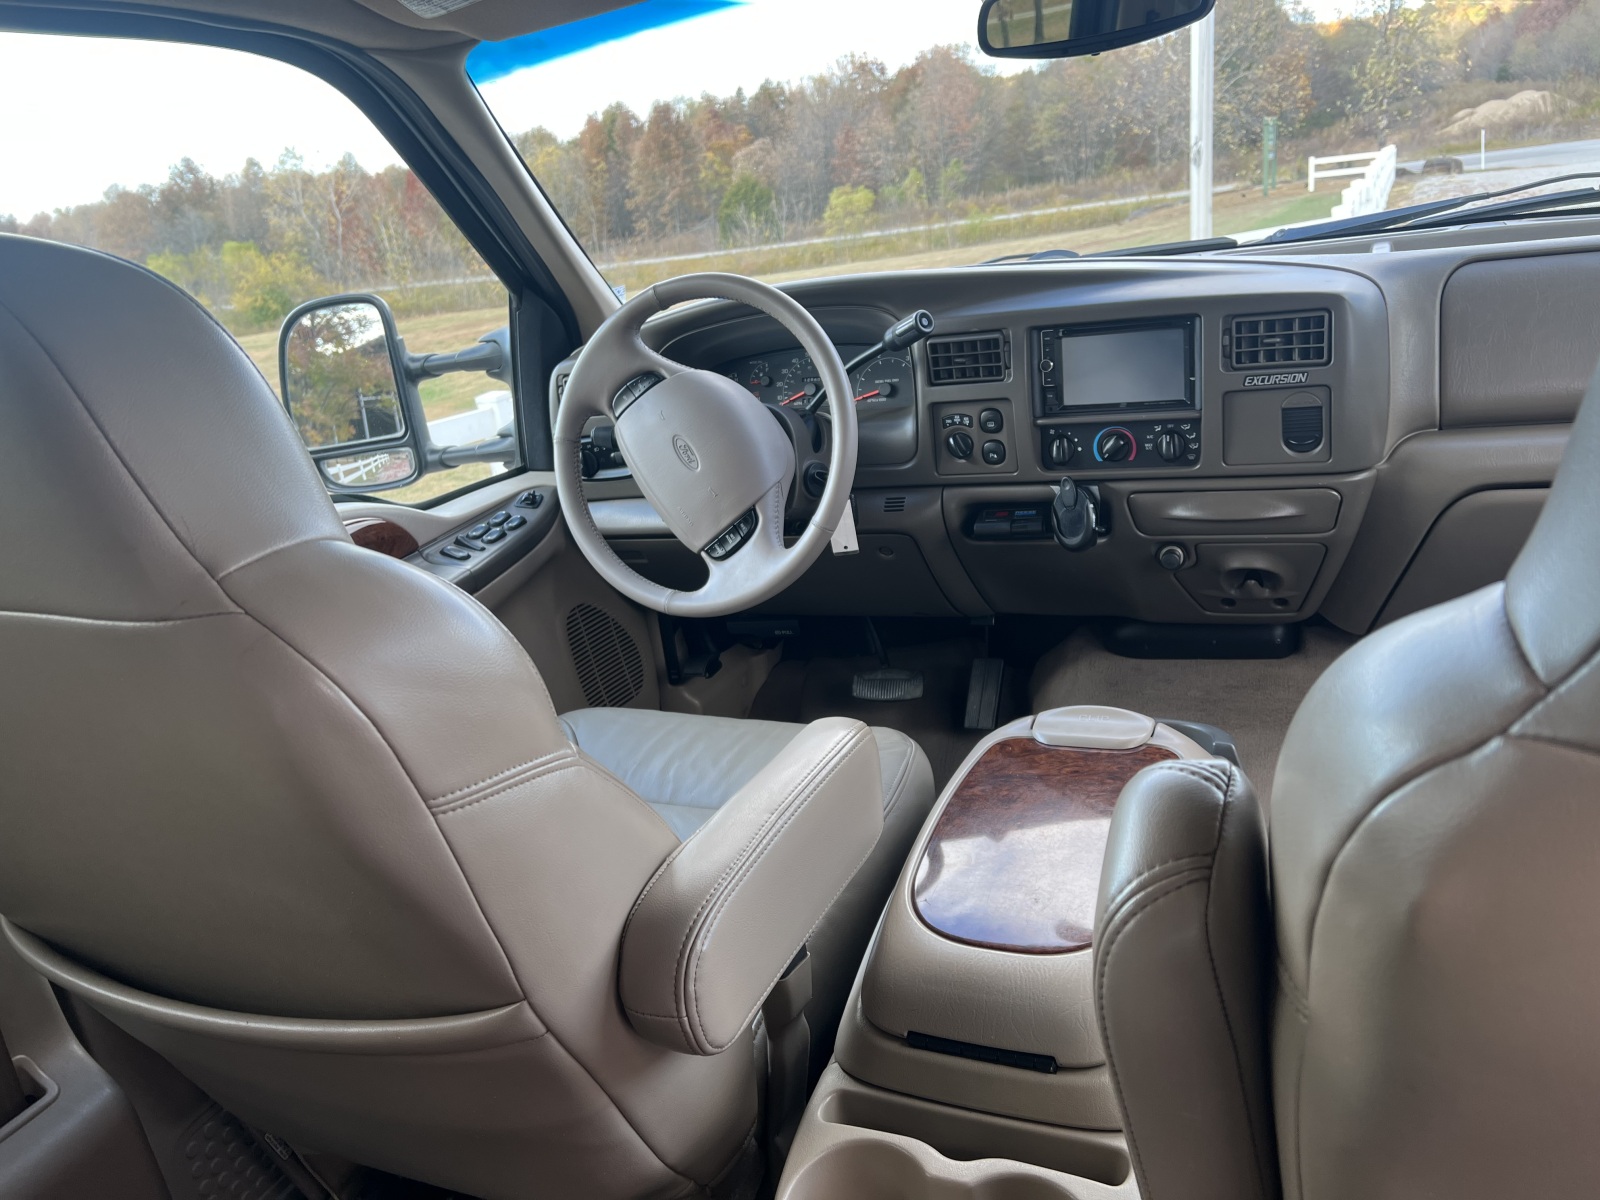 For Sale: 2001 Ford Excursion 4x4 7.3L 128,800miles - photo45